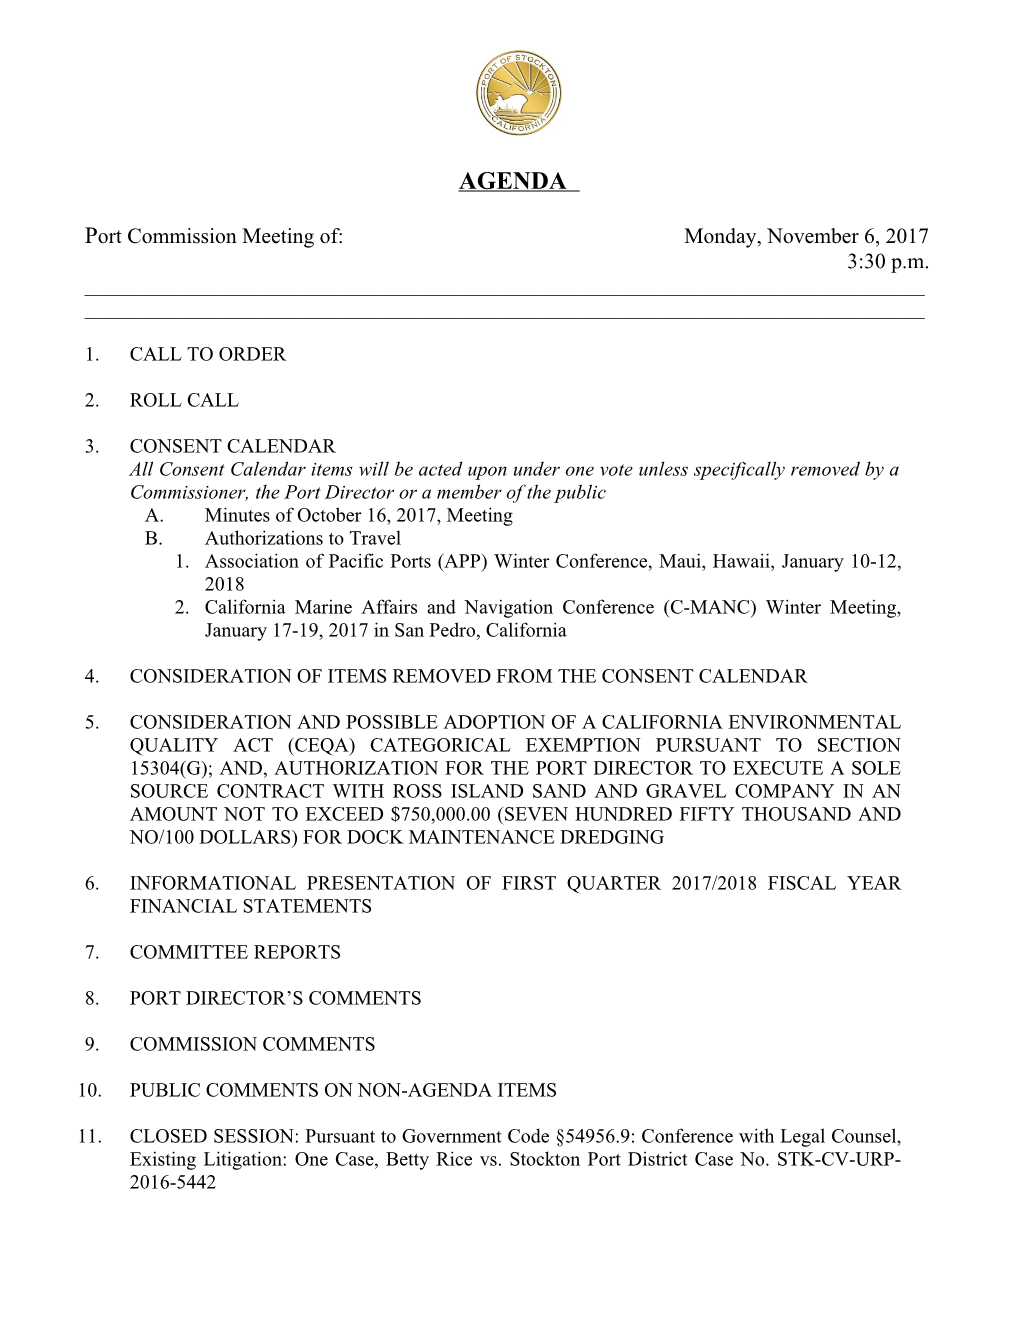 Port Commission Meeting Of: Monday, November 6, 2017